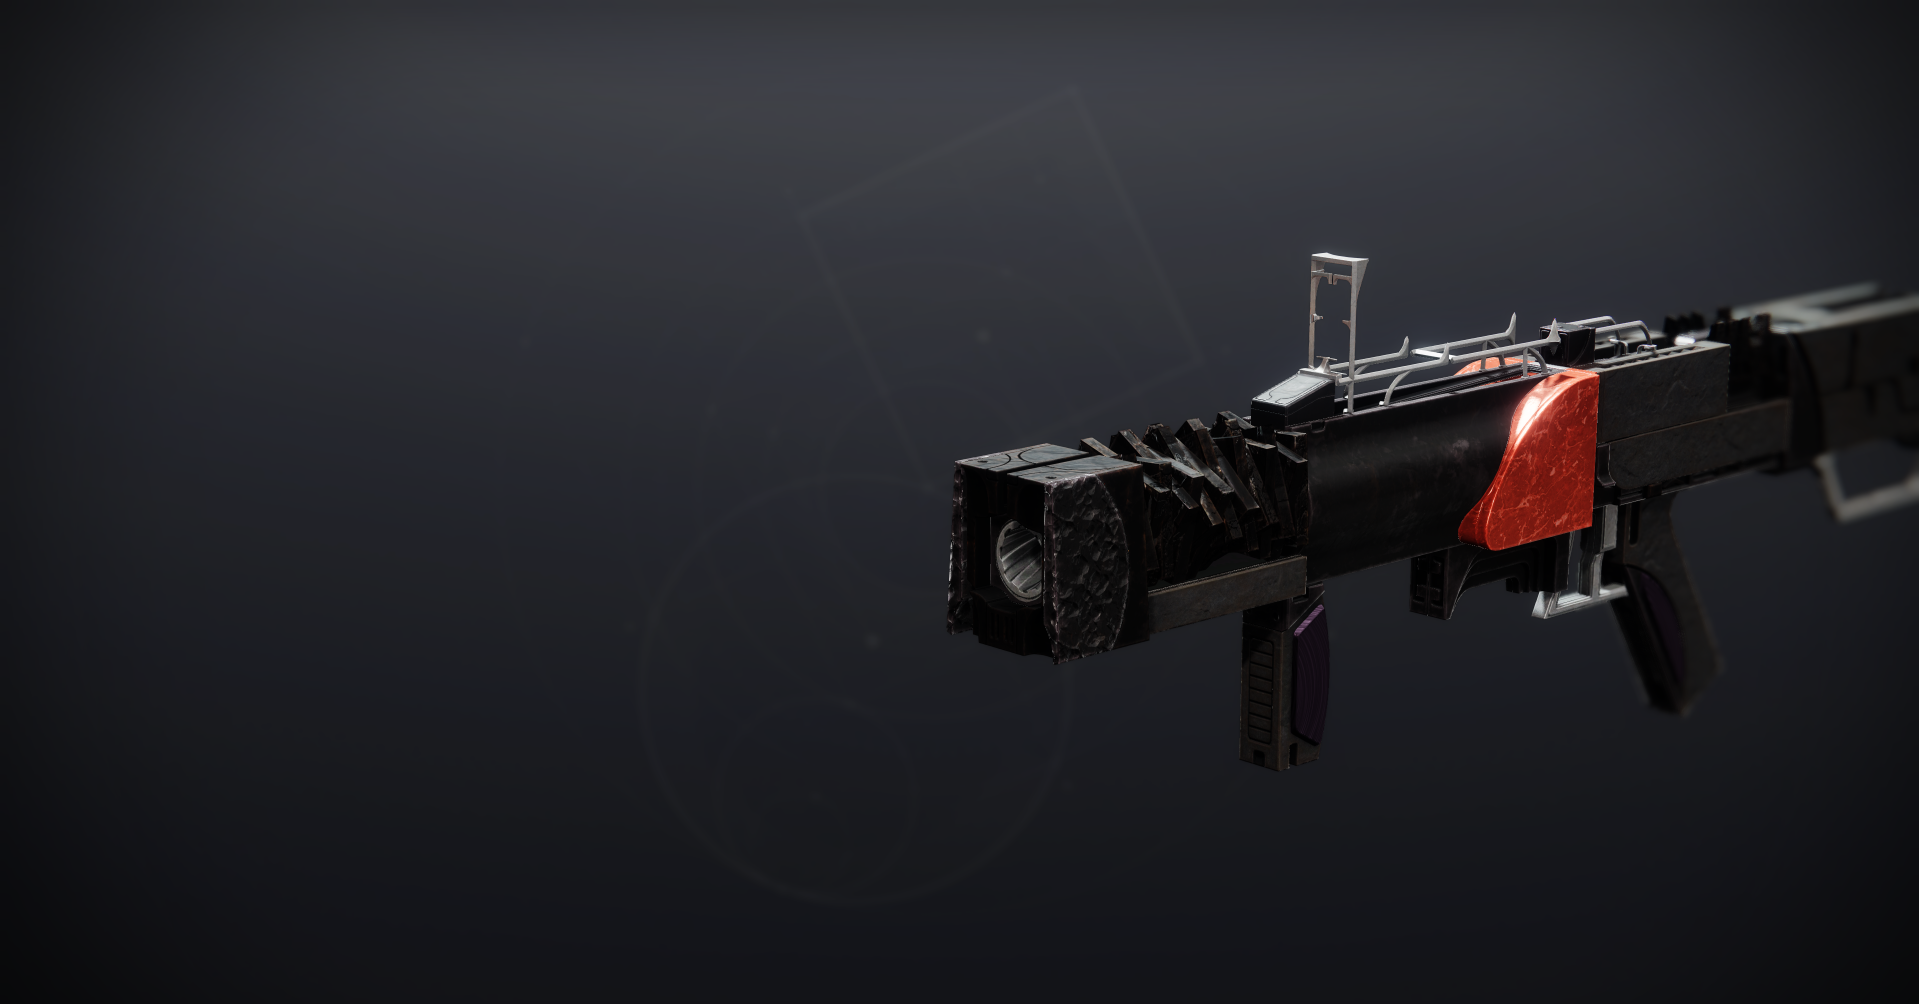 The Forbearance grenade launcher as seen in collections.